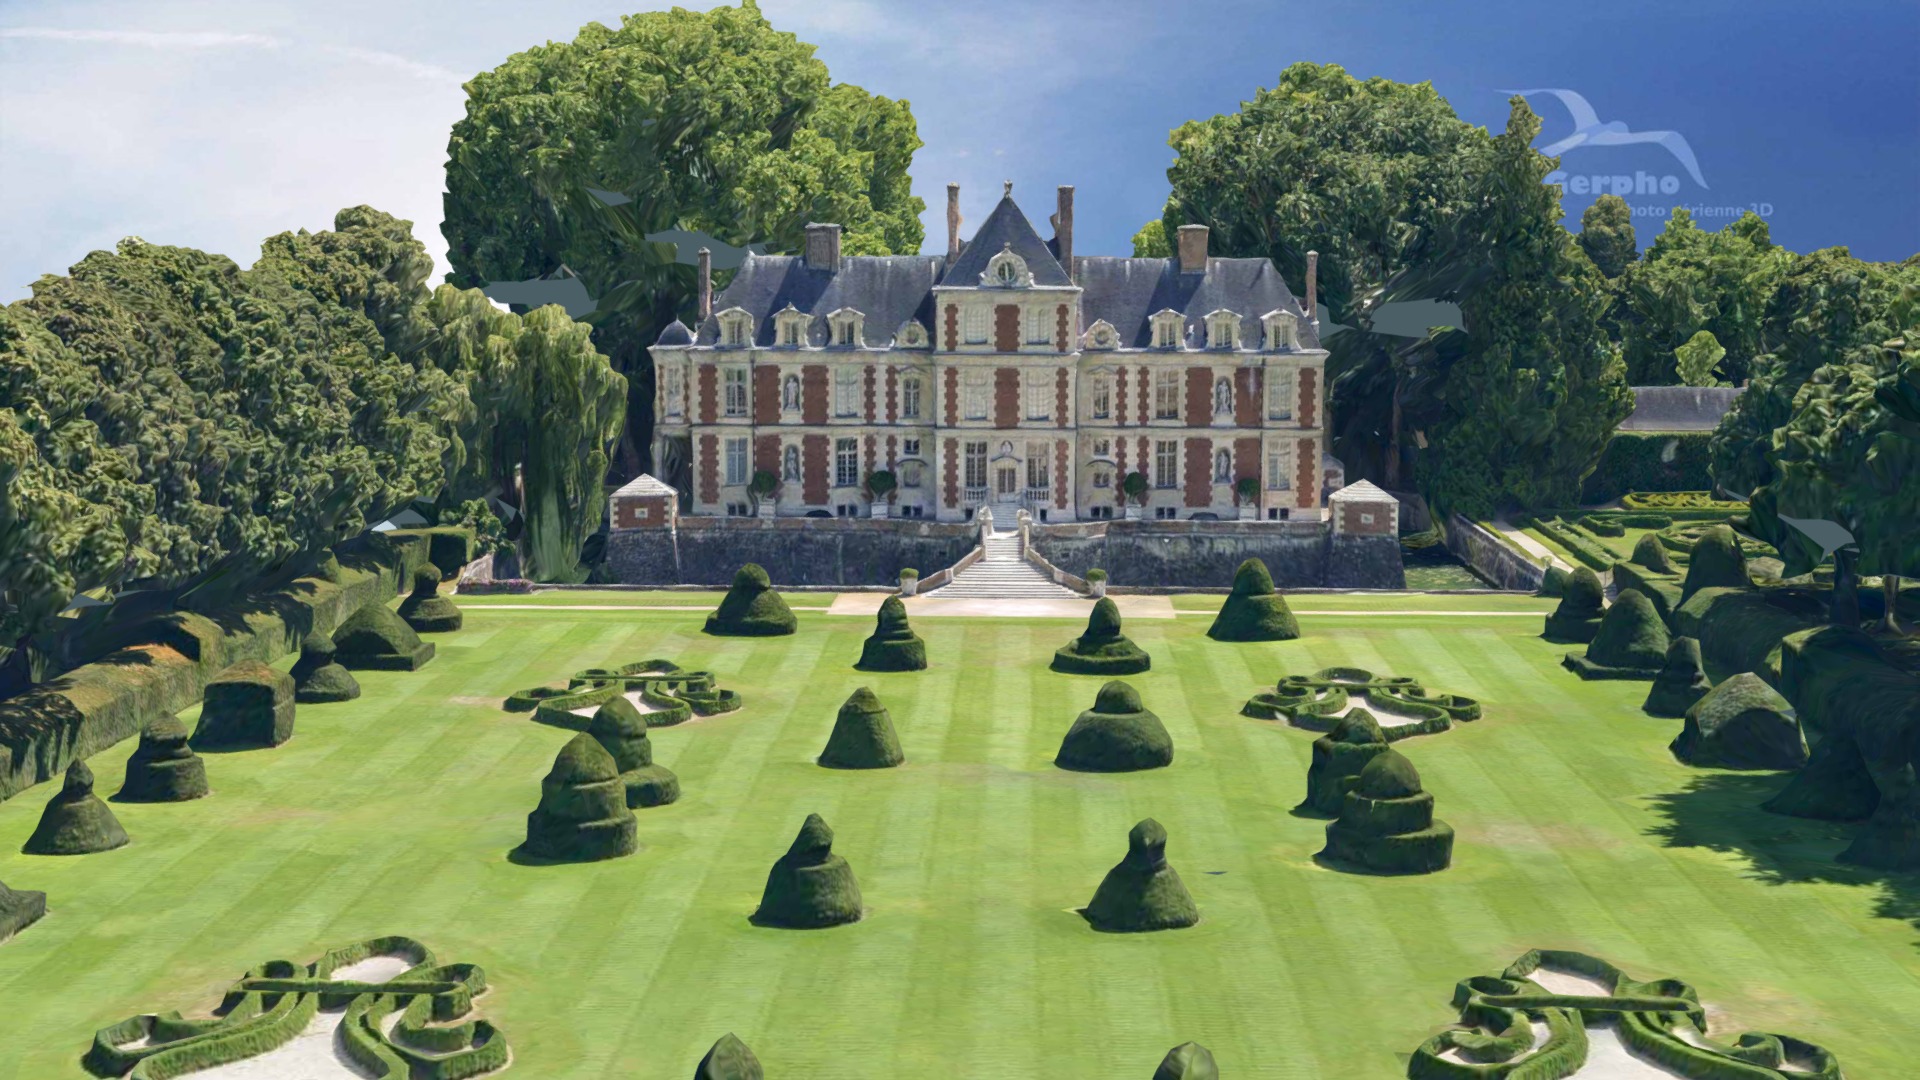 This chateau is located a few km west of the famous &ldquo;chateau de versailles